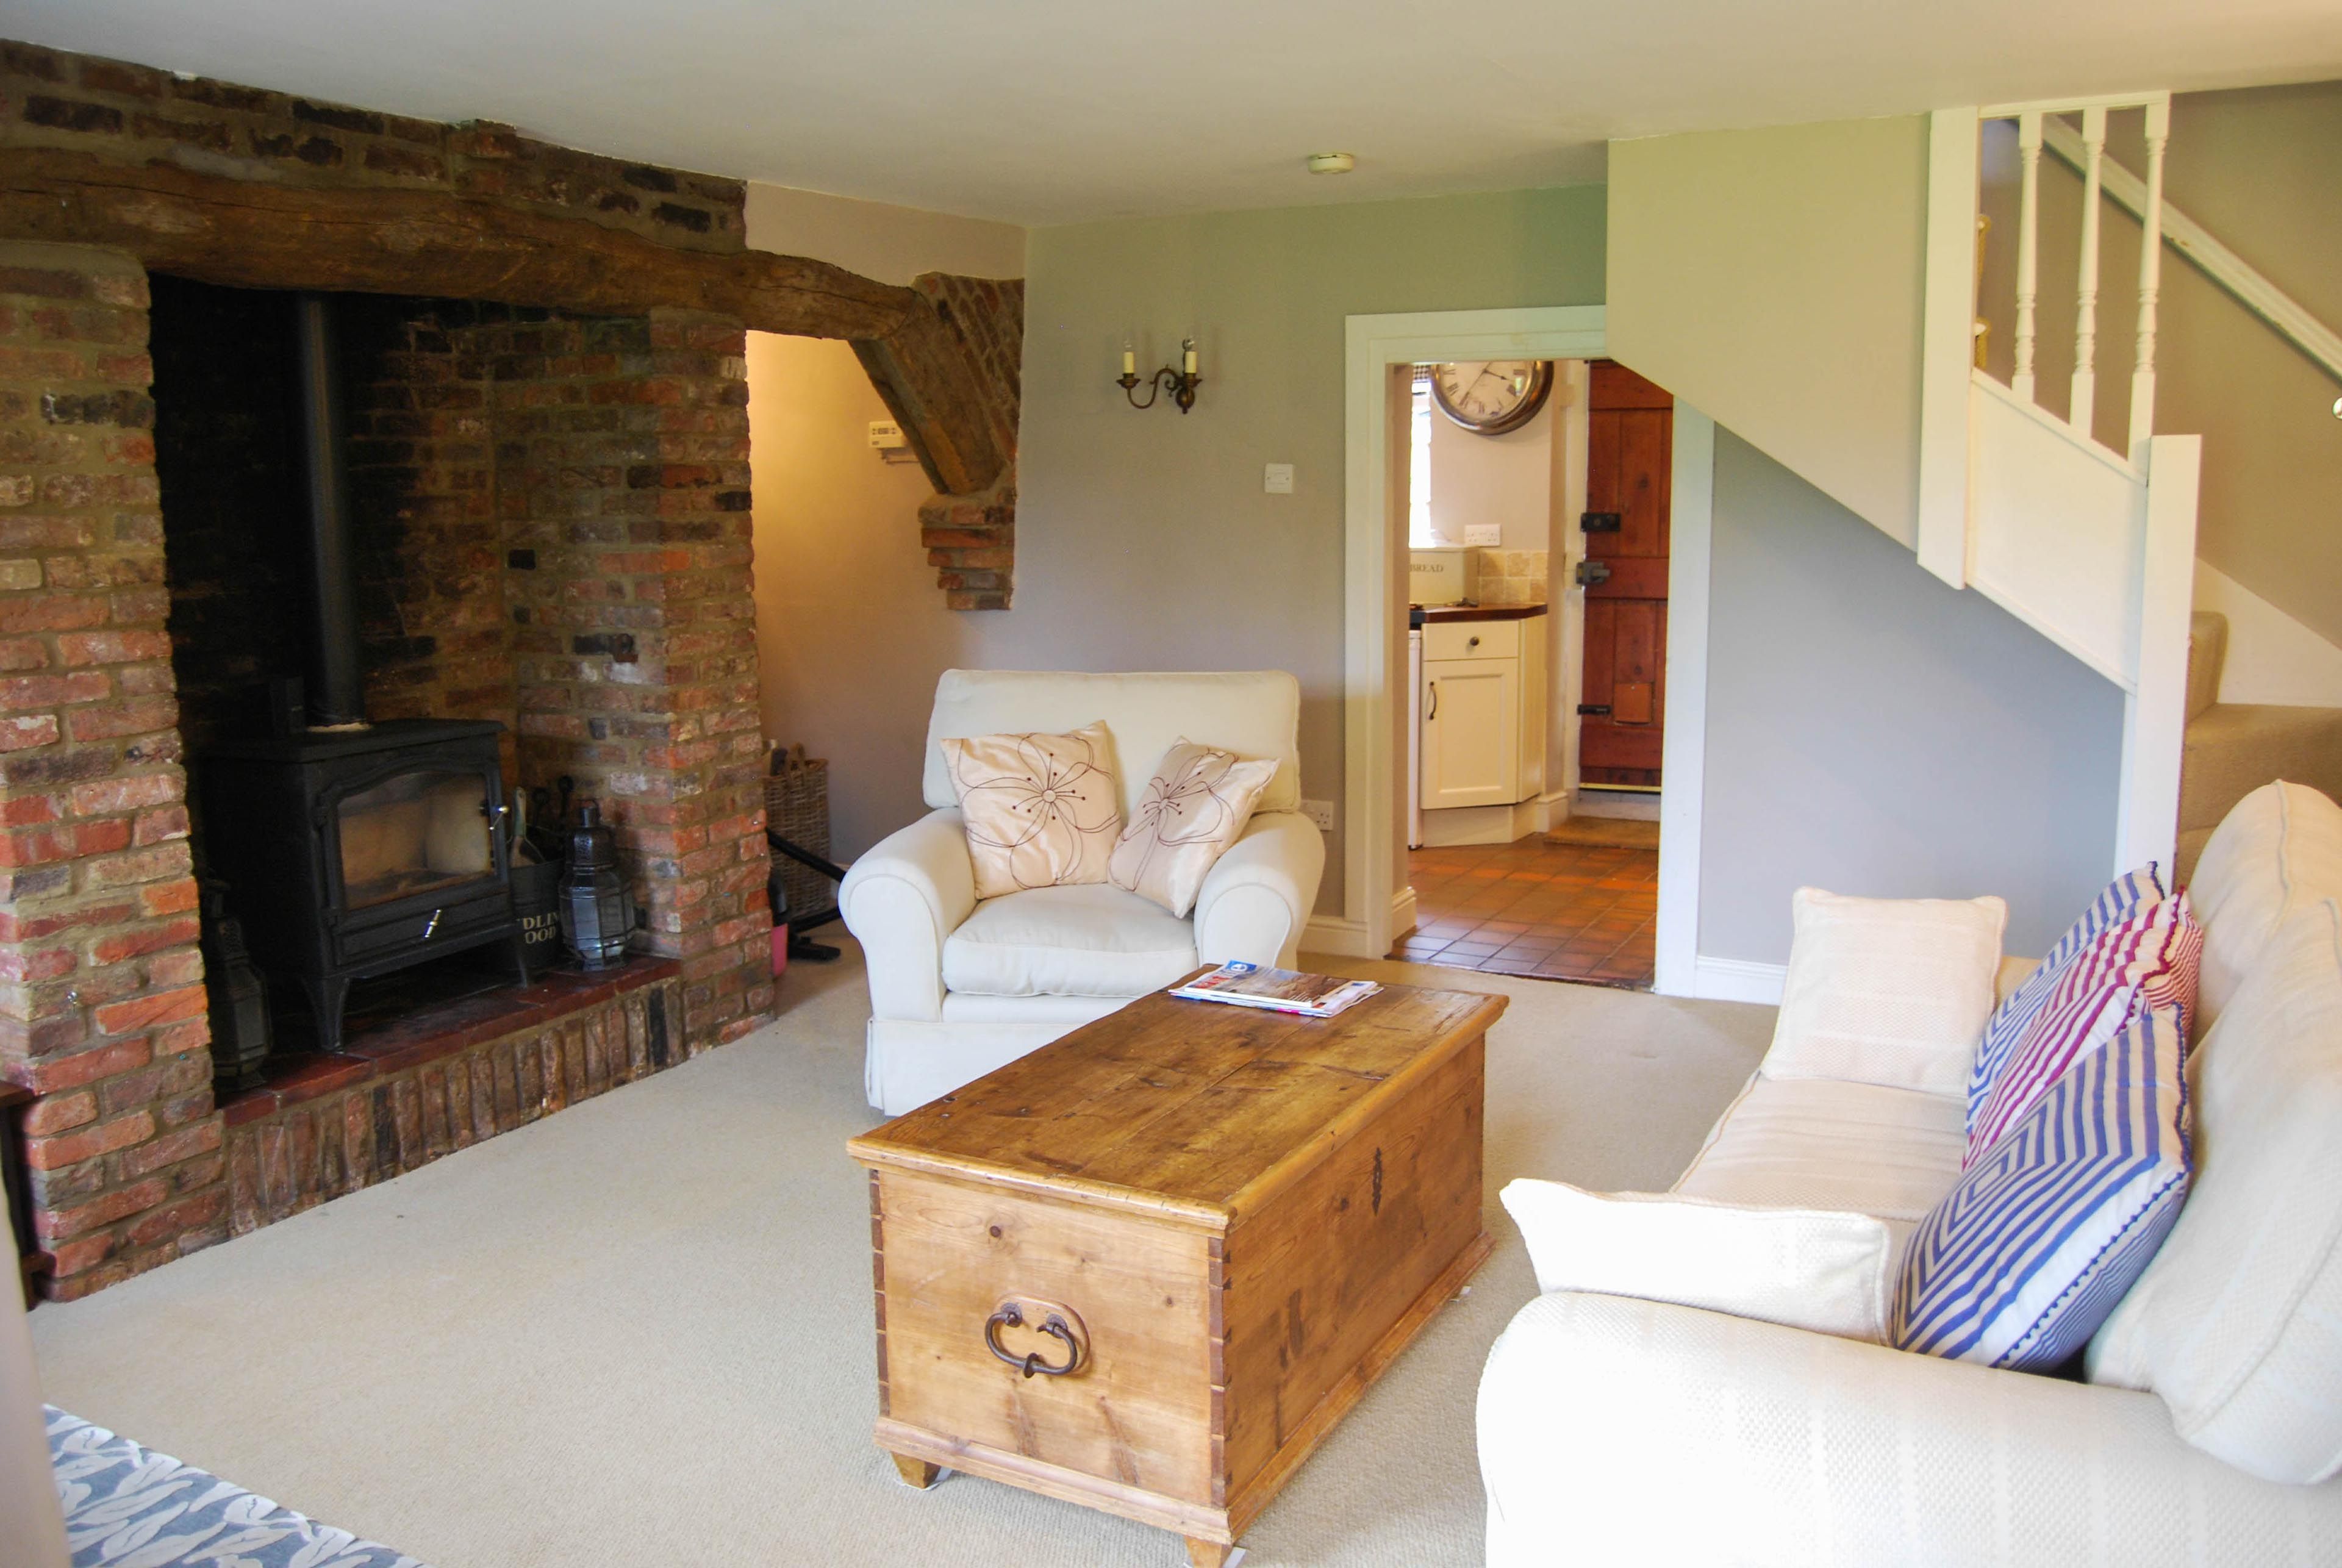 Details about a cottage Holiday at Toms Cottage